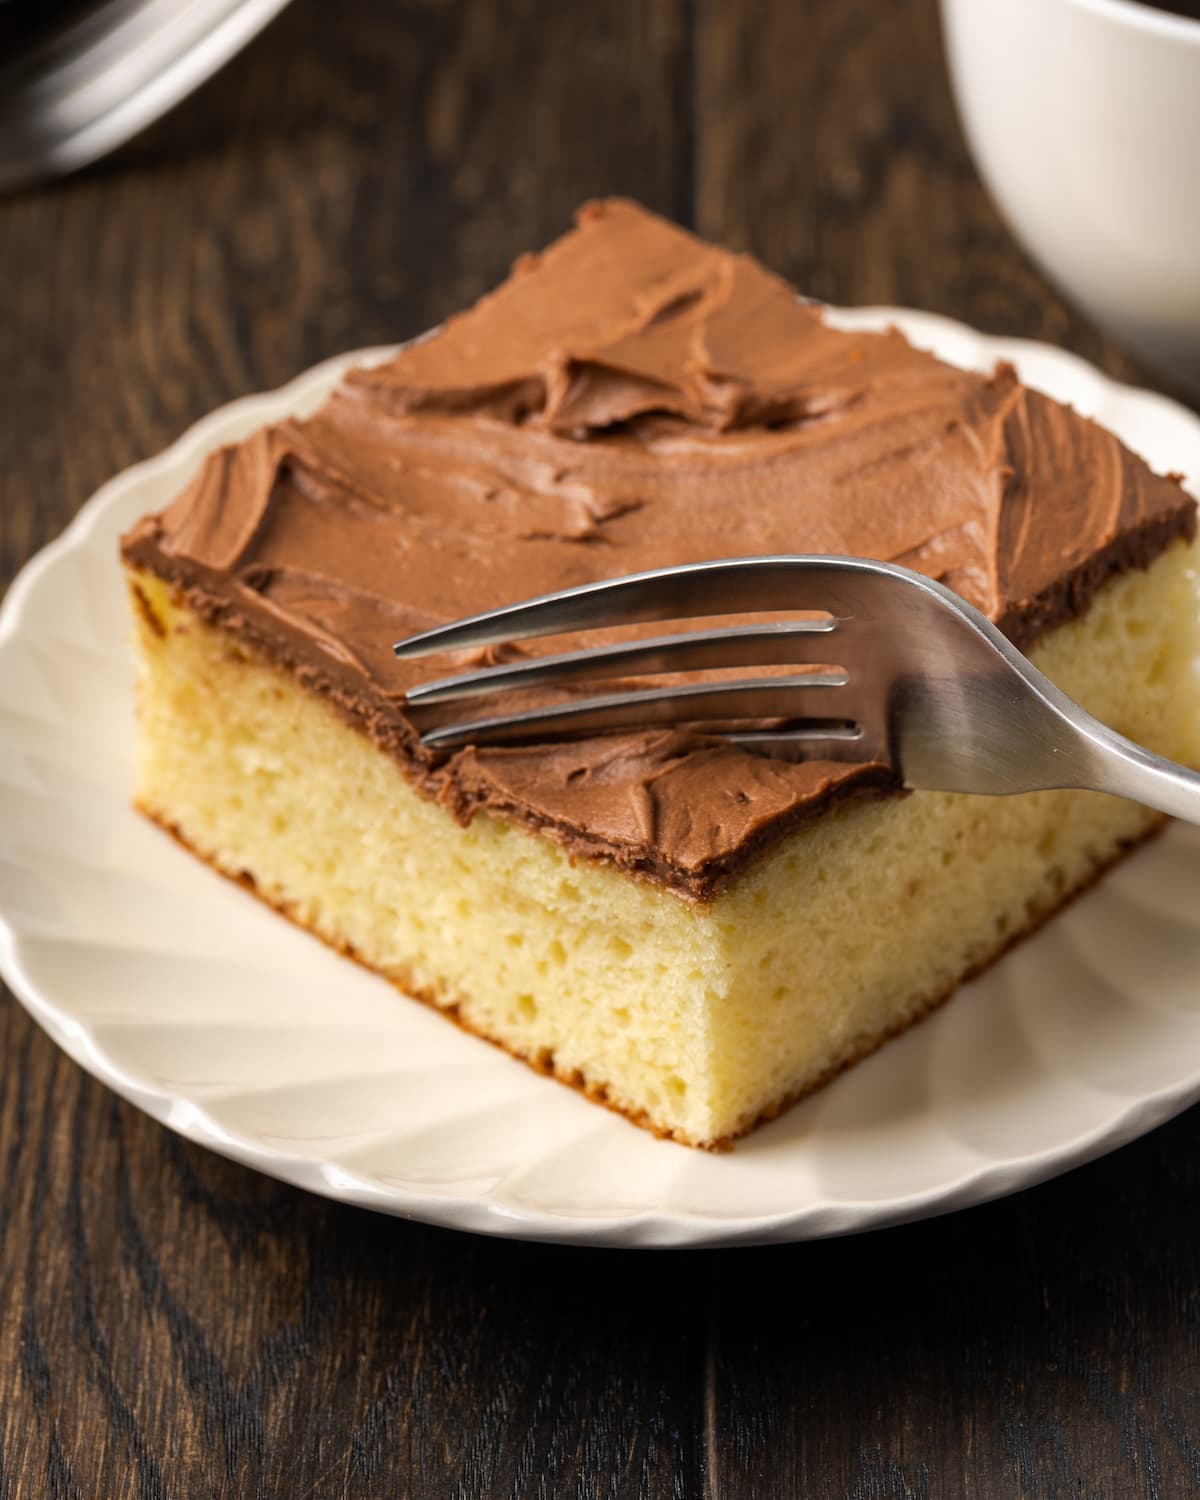 A fork cuts into the corner of a slice of frosted sour cream cake on a white plate.